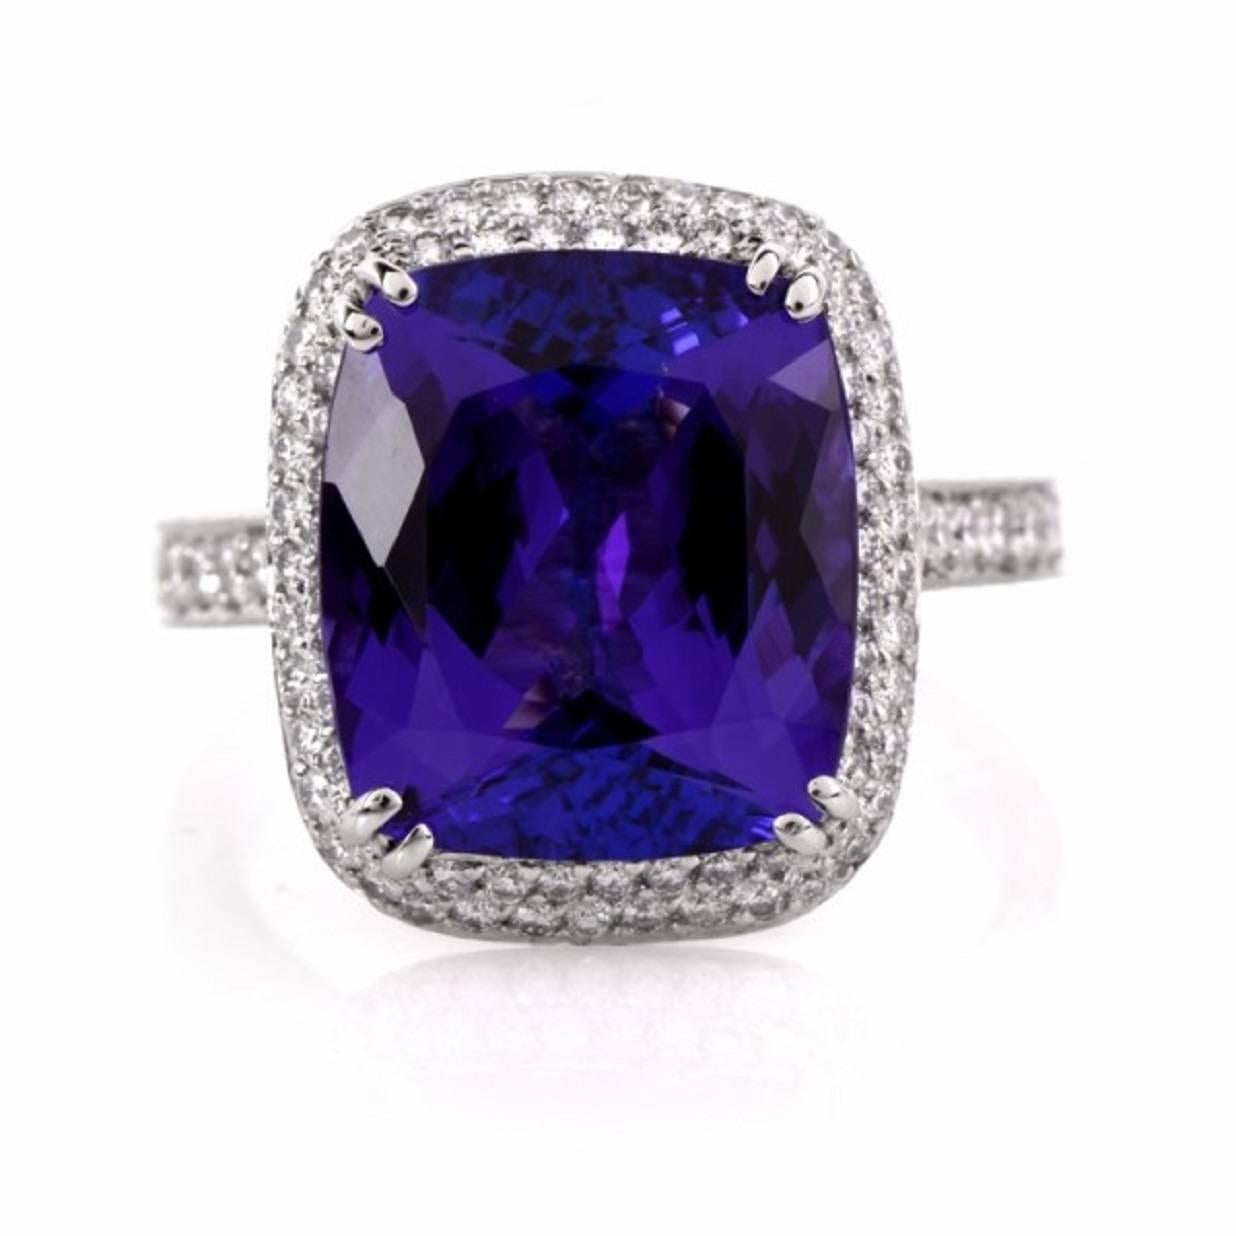 This elegant enchanting Designer Beaudry engagment ring with diamonds and blue tanzanite is crafted in solid platinum, weighing approx: 9.4 grams. Ring  measuring approx: 16mm x 13.5mm. Designed as a stylized square plaque with delicately detailed